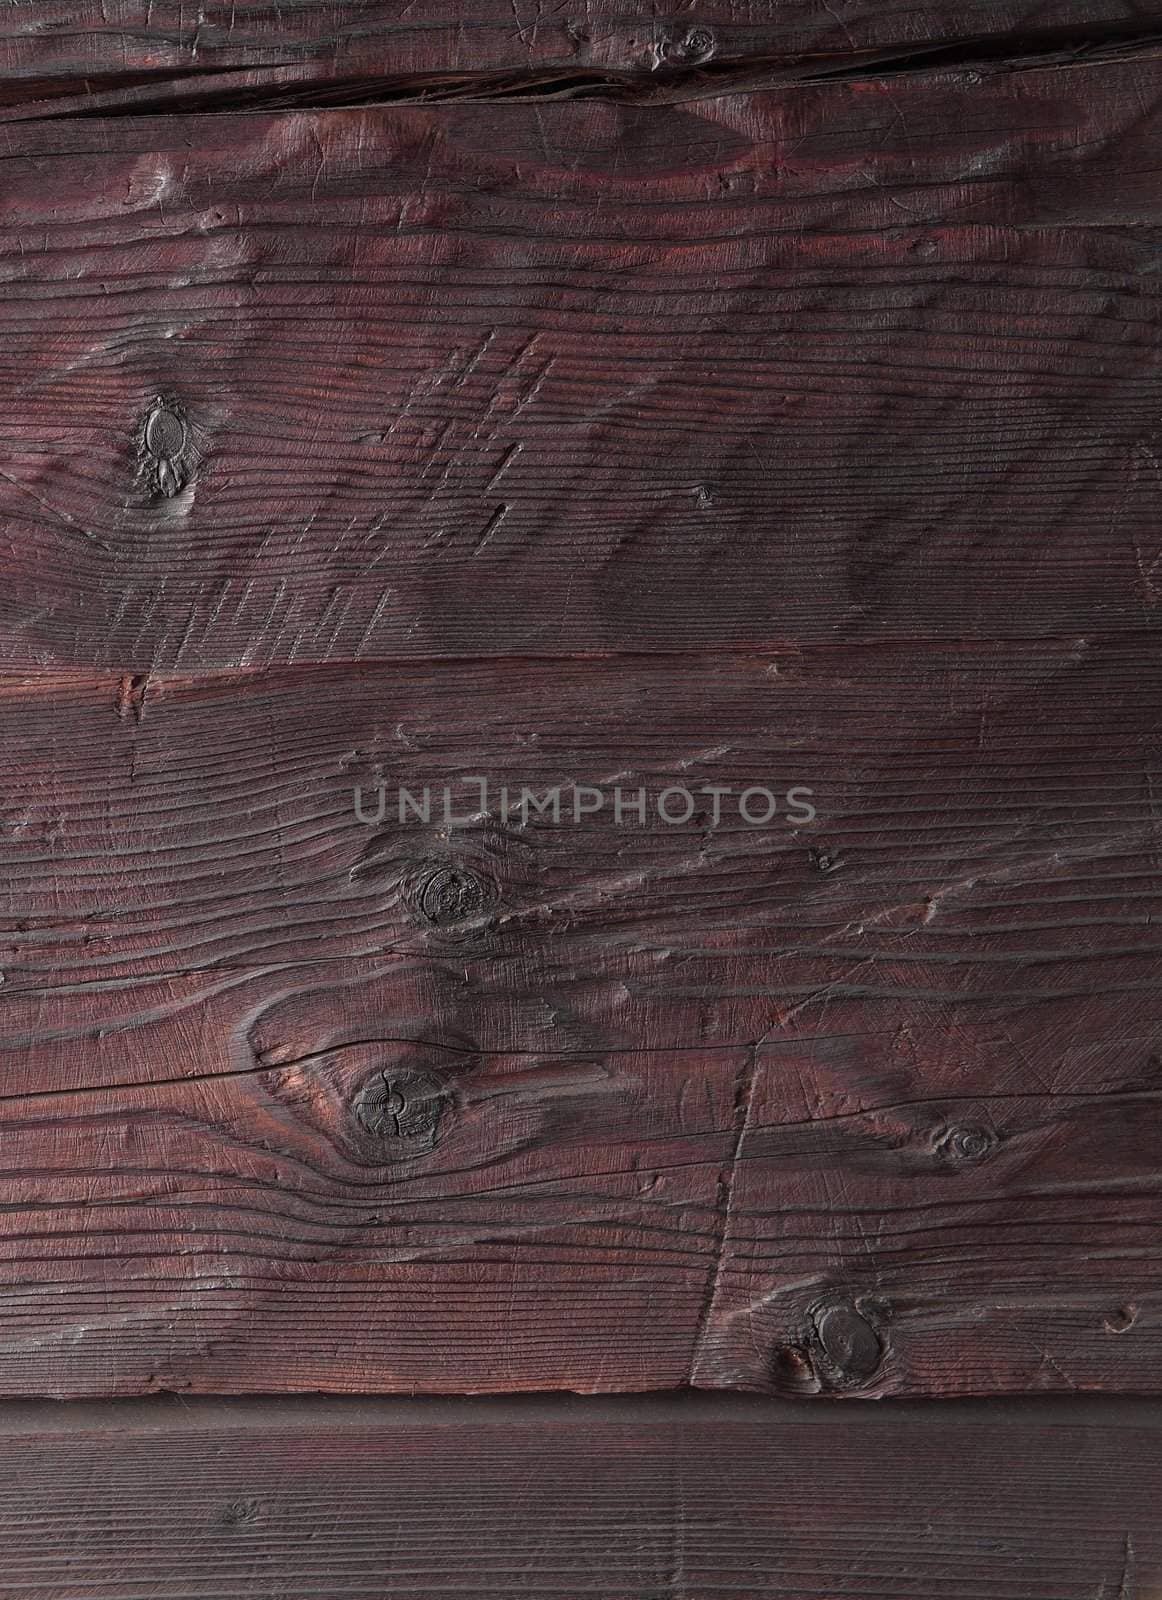 From seventeen century hard wooden planks with knots.